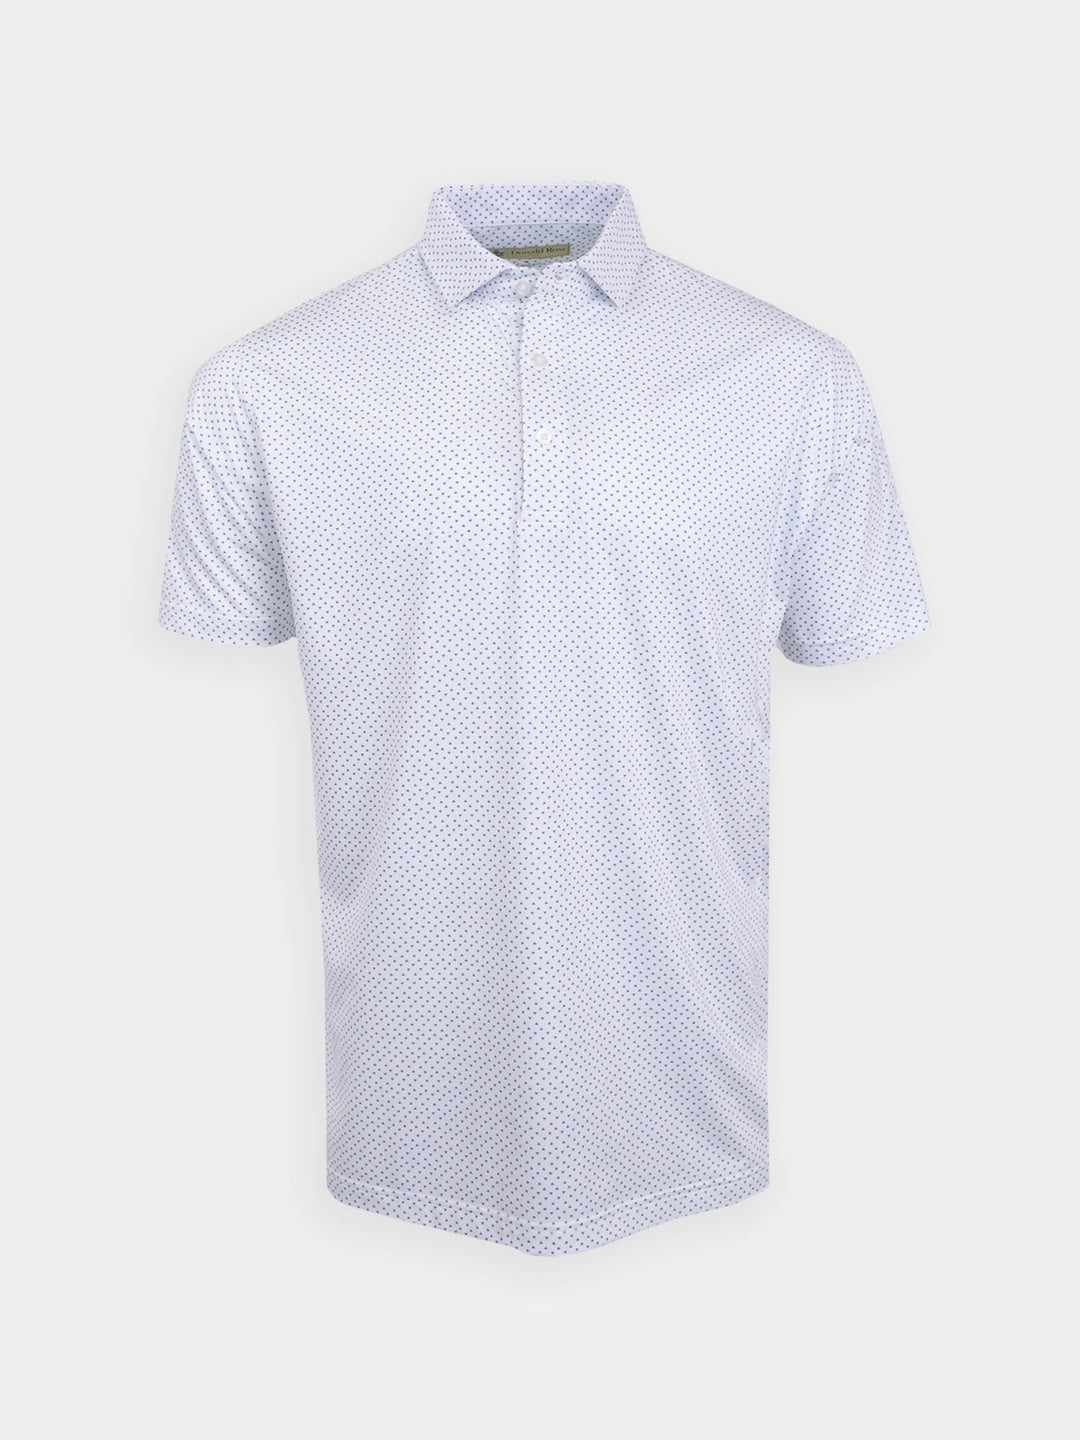 Donald Ross Classic Fit Mens Short Sleeve Tri-Dot Print Polo - WHITE/NAVY/EMERALD